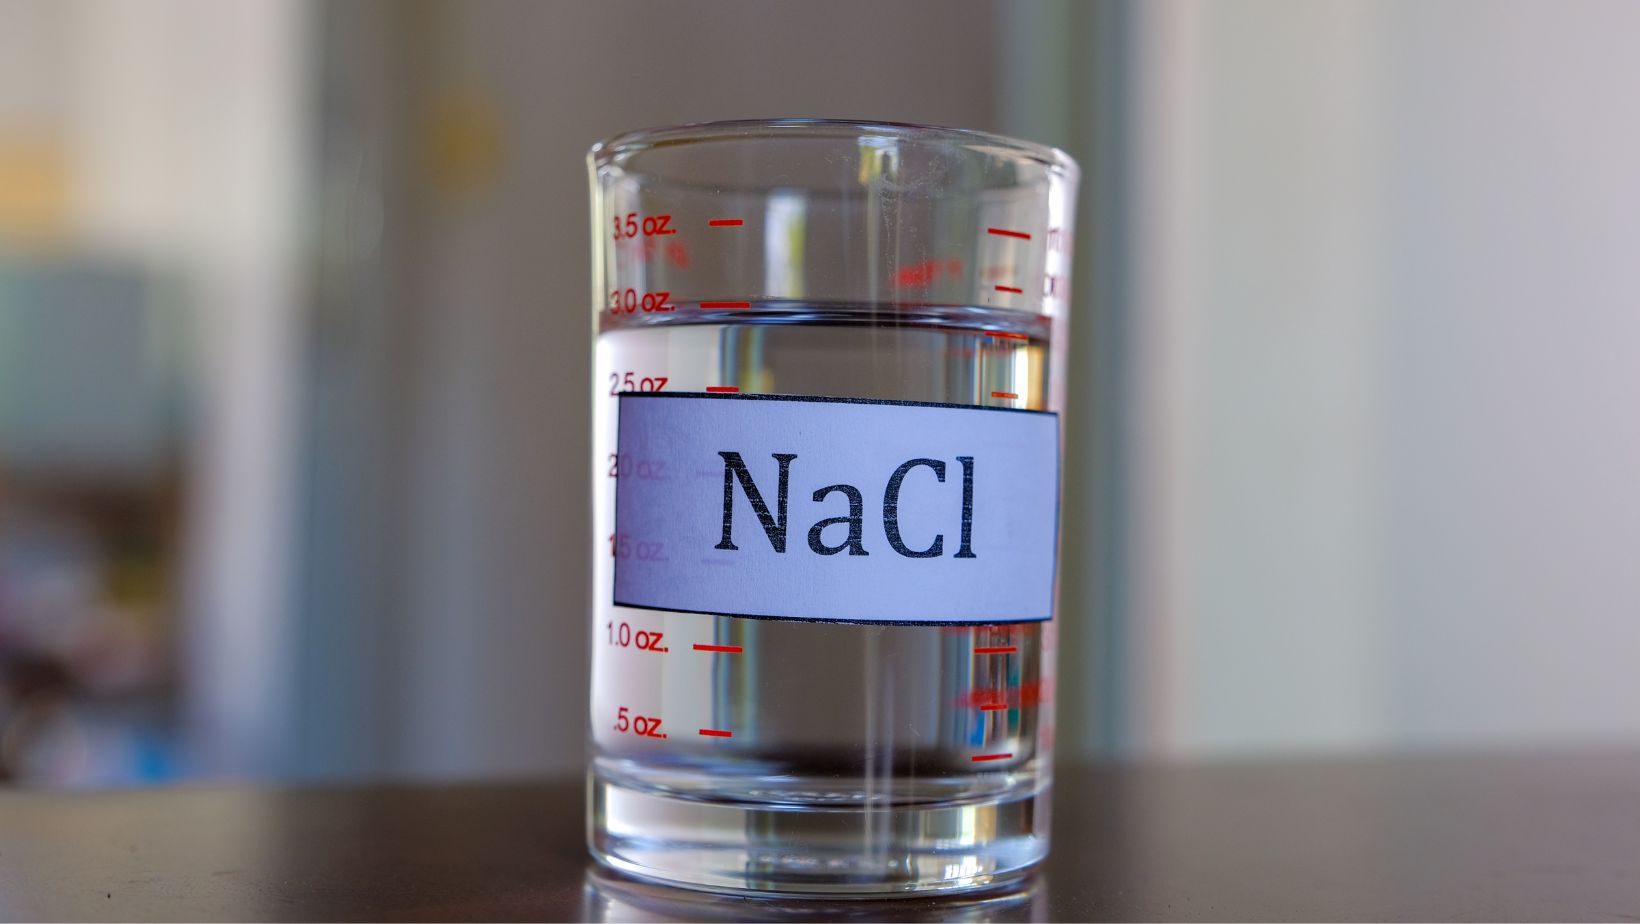 how many moles of nacl are present in a solution with a molarity of 8.59 m and a volume of 125 ml?